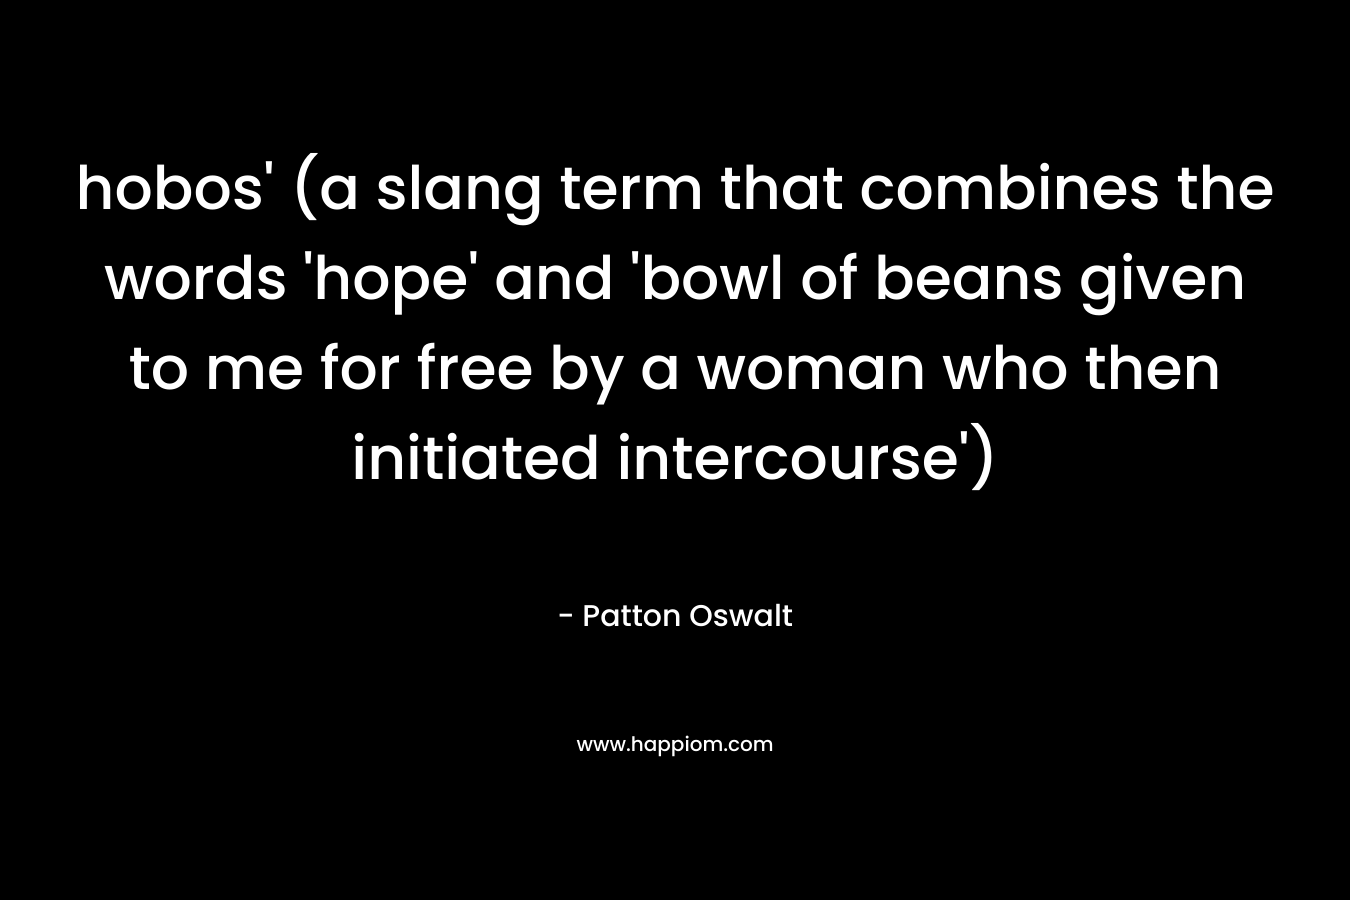 hobos’ (a slang term that combines the words ‘hope’ and ‘bowl of beans given to me for free by a woman who then initiated intercourse’) – Patton Oswalt